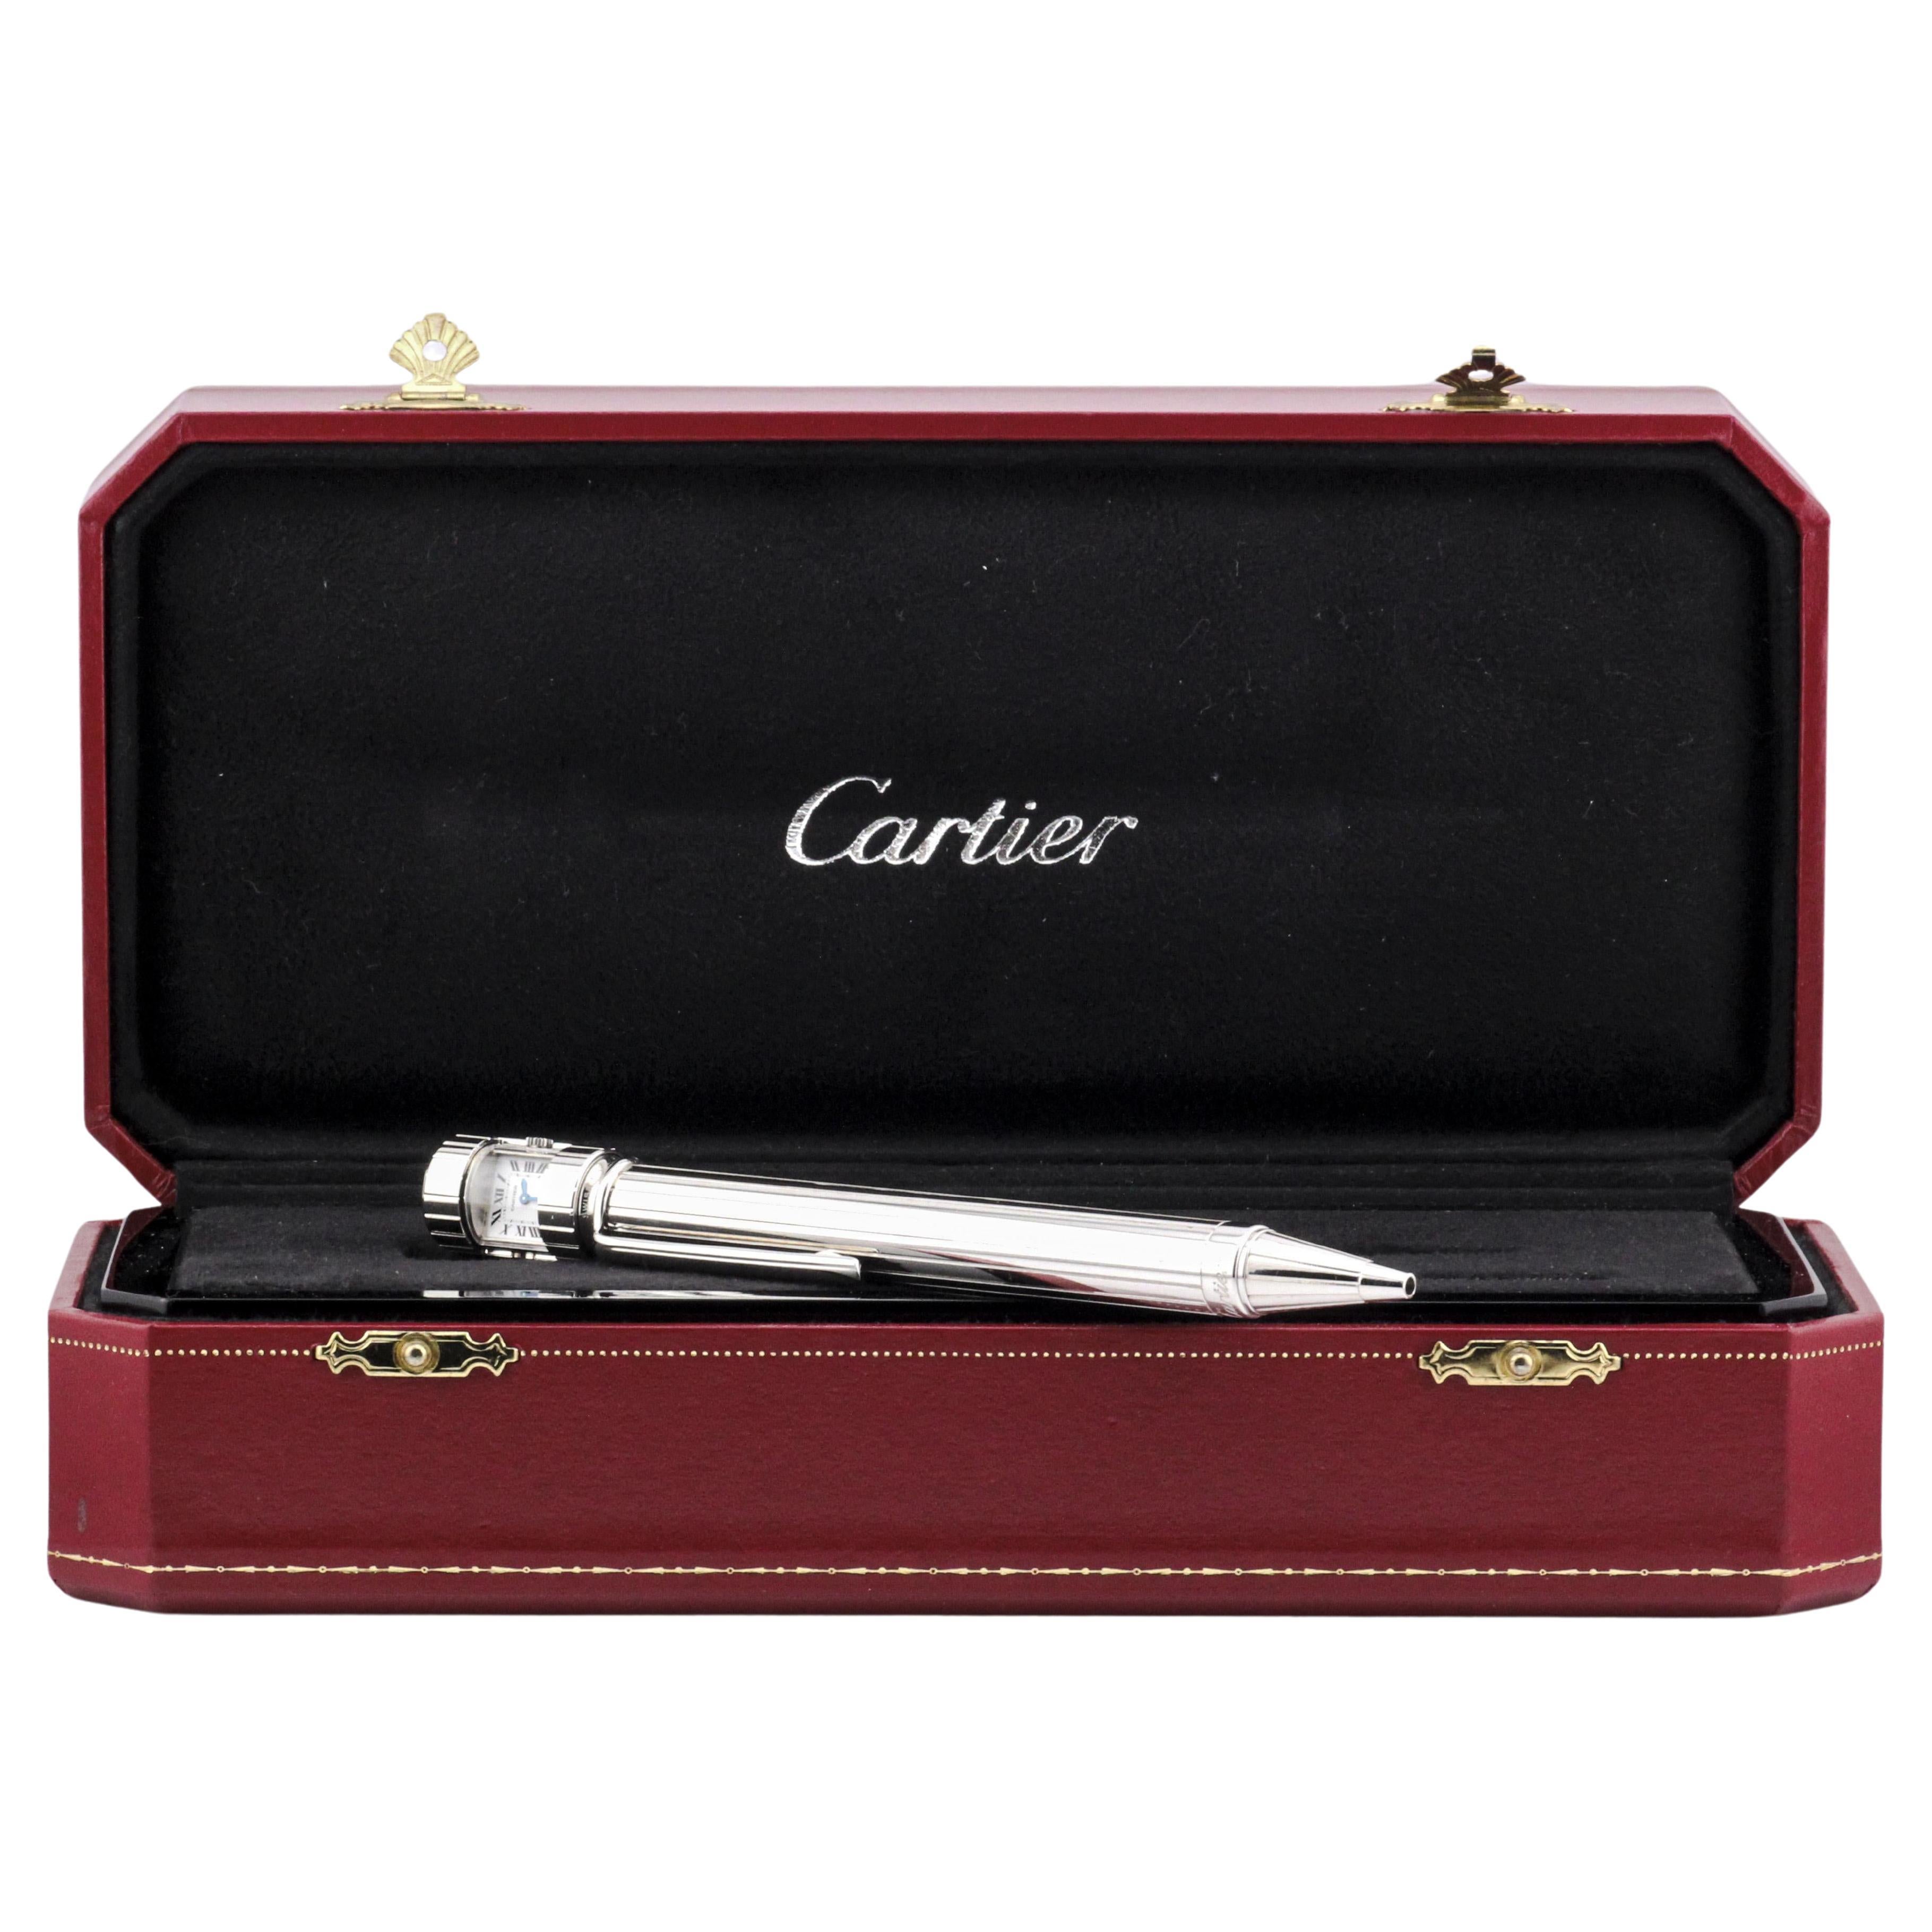 Cartier Limited Edition Watch Ballpoint Pen For Sale